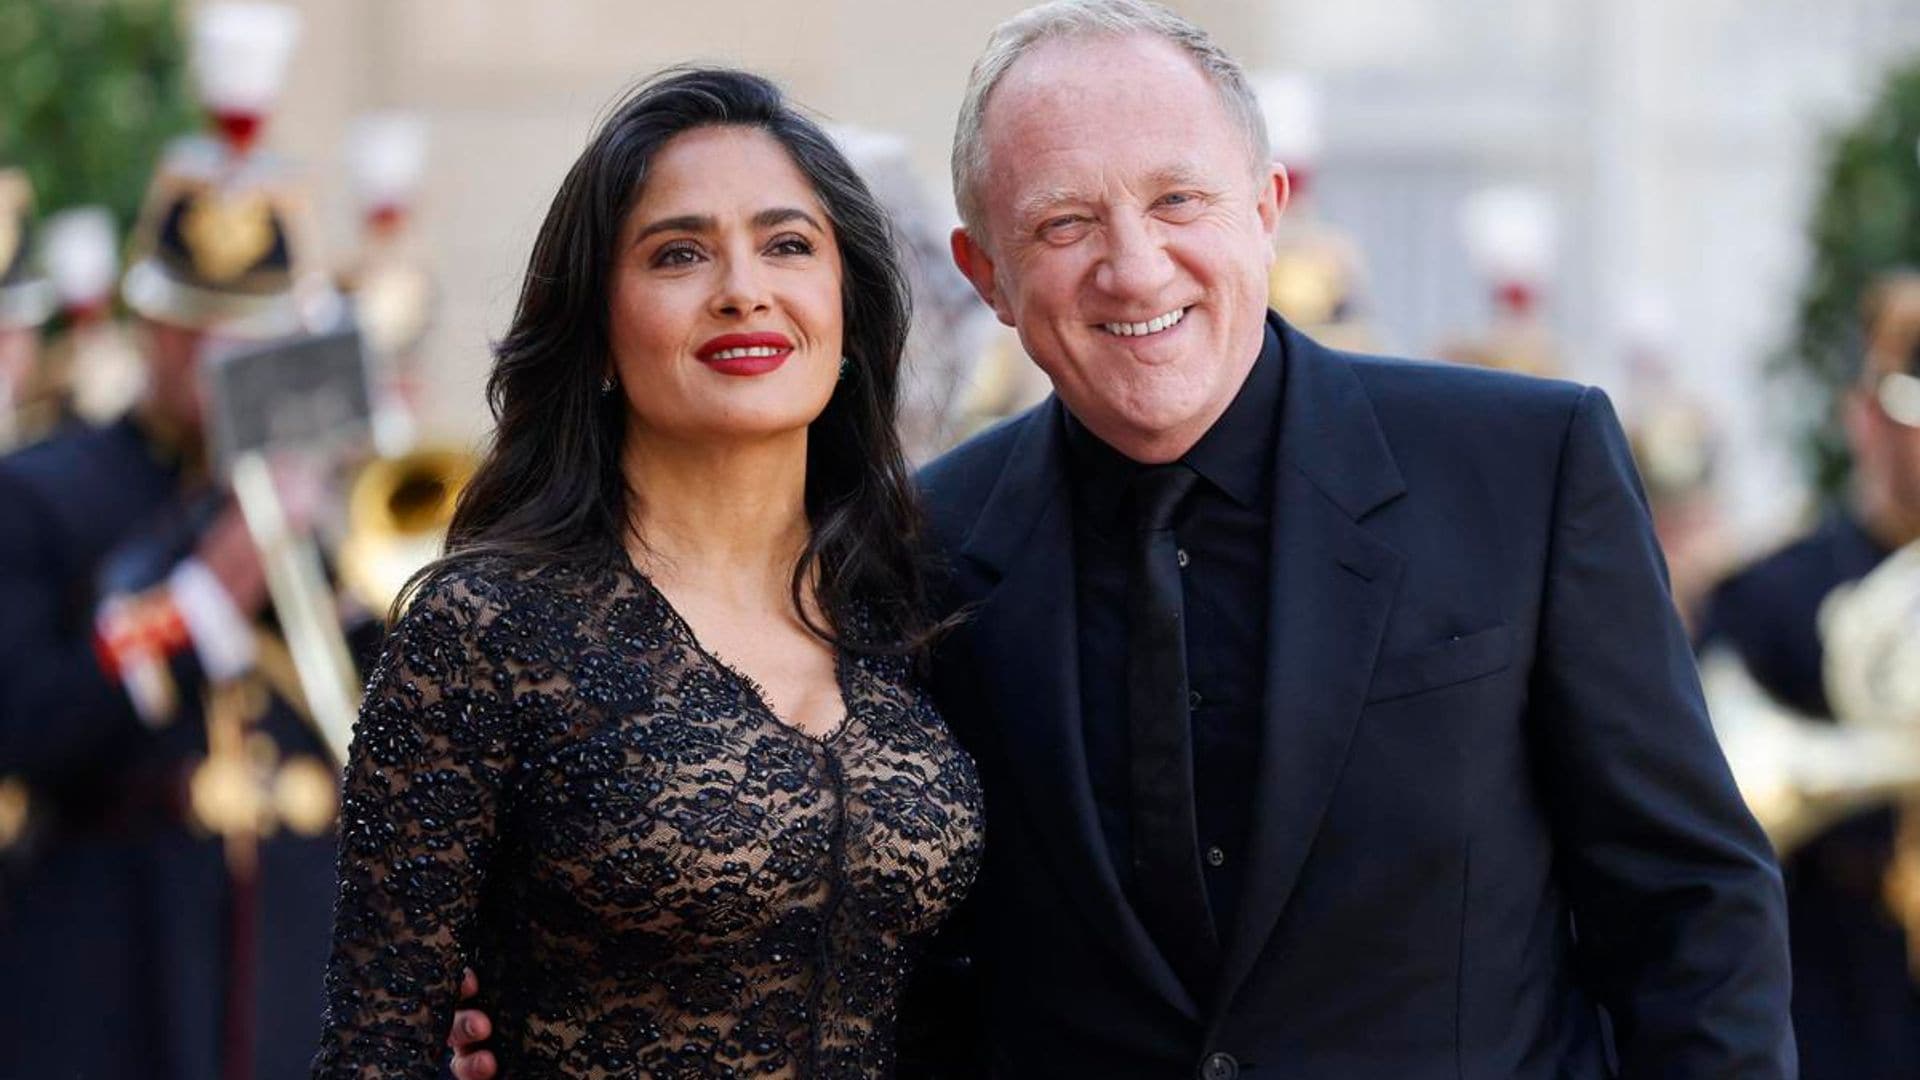 Salma Hayek dazzles in Paris during state dinner hosted by the President of France, Emmanuel Macron